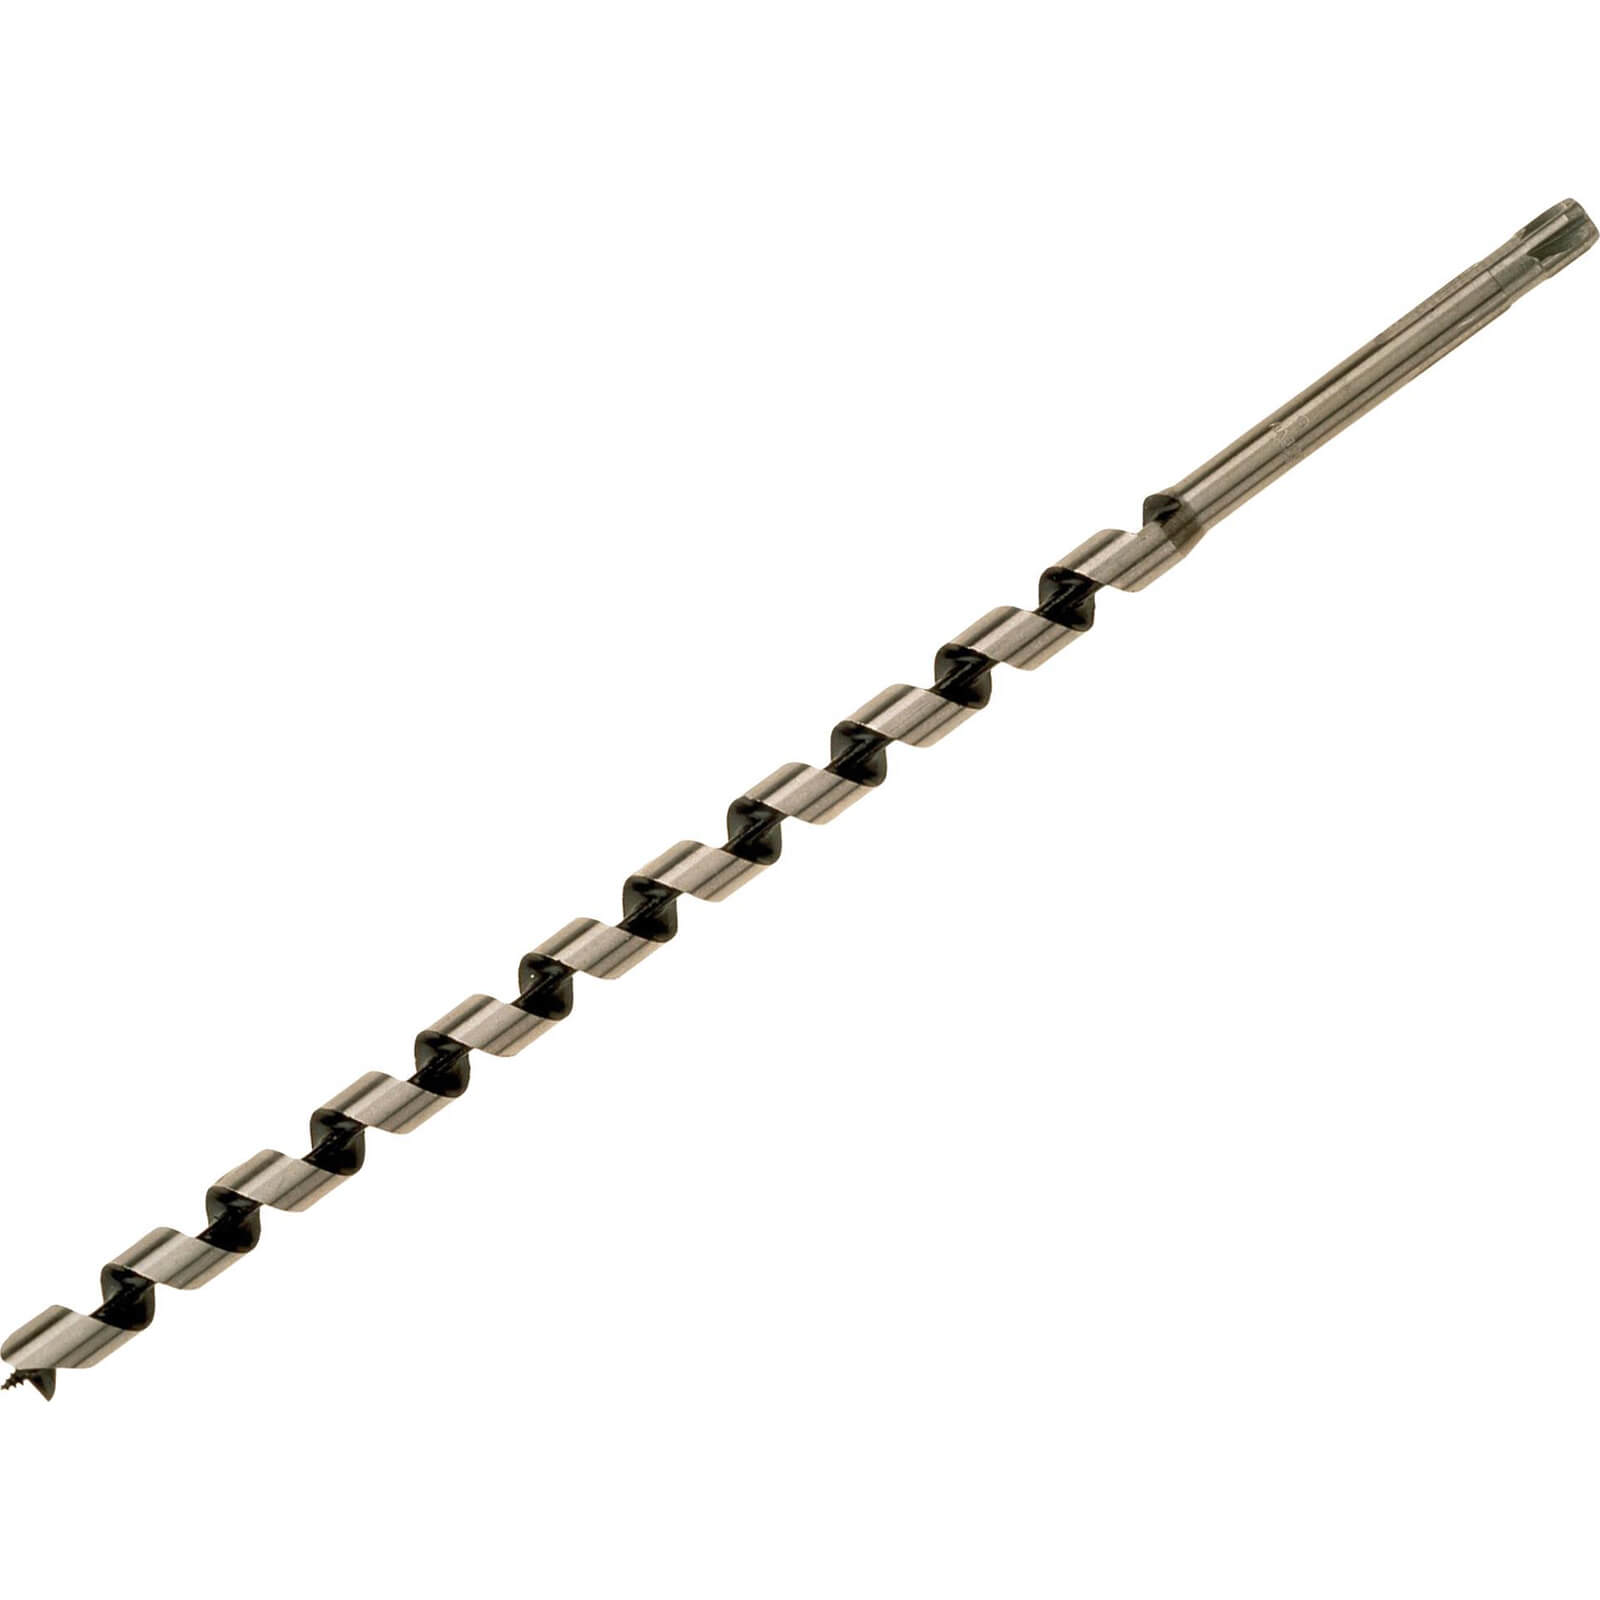 Photo of Bahco 9627 Series Long Combination Auger Drill Bit 30mm 460mm